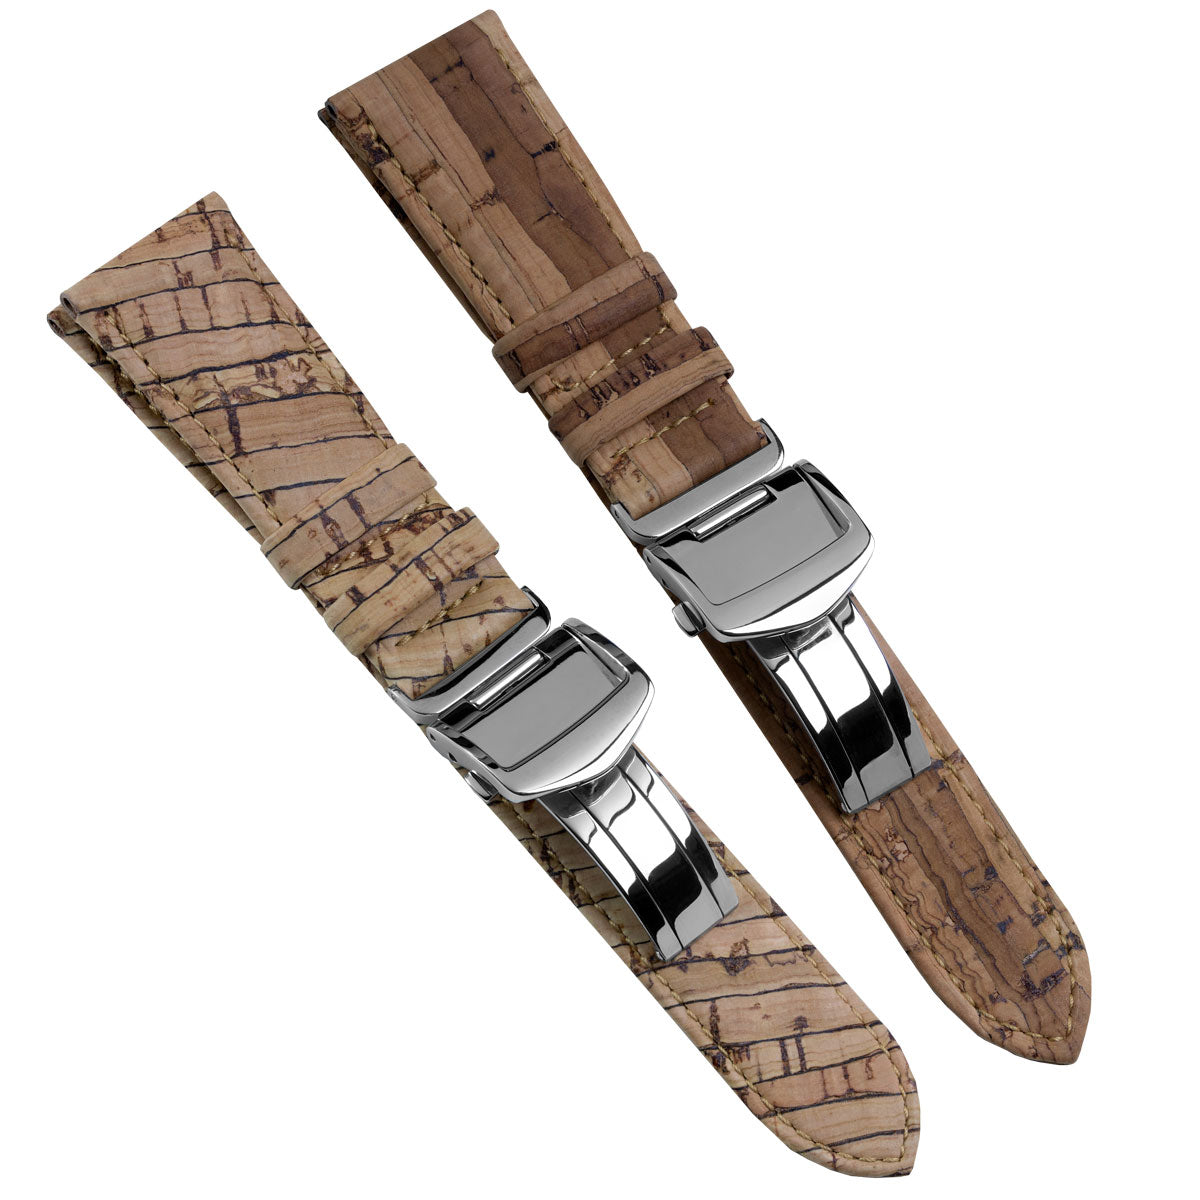 Cork Watch Straps with Deployant Buckles